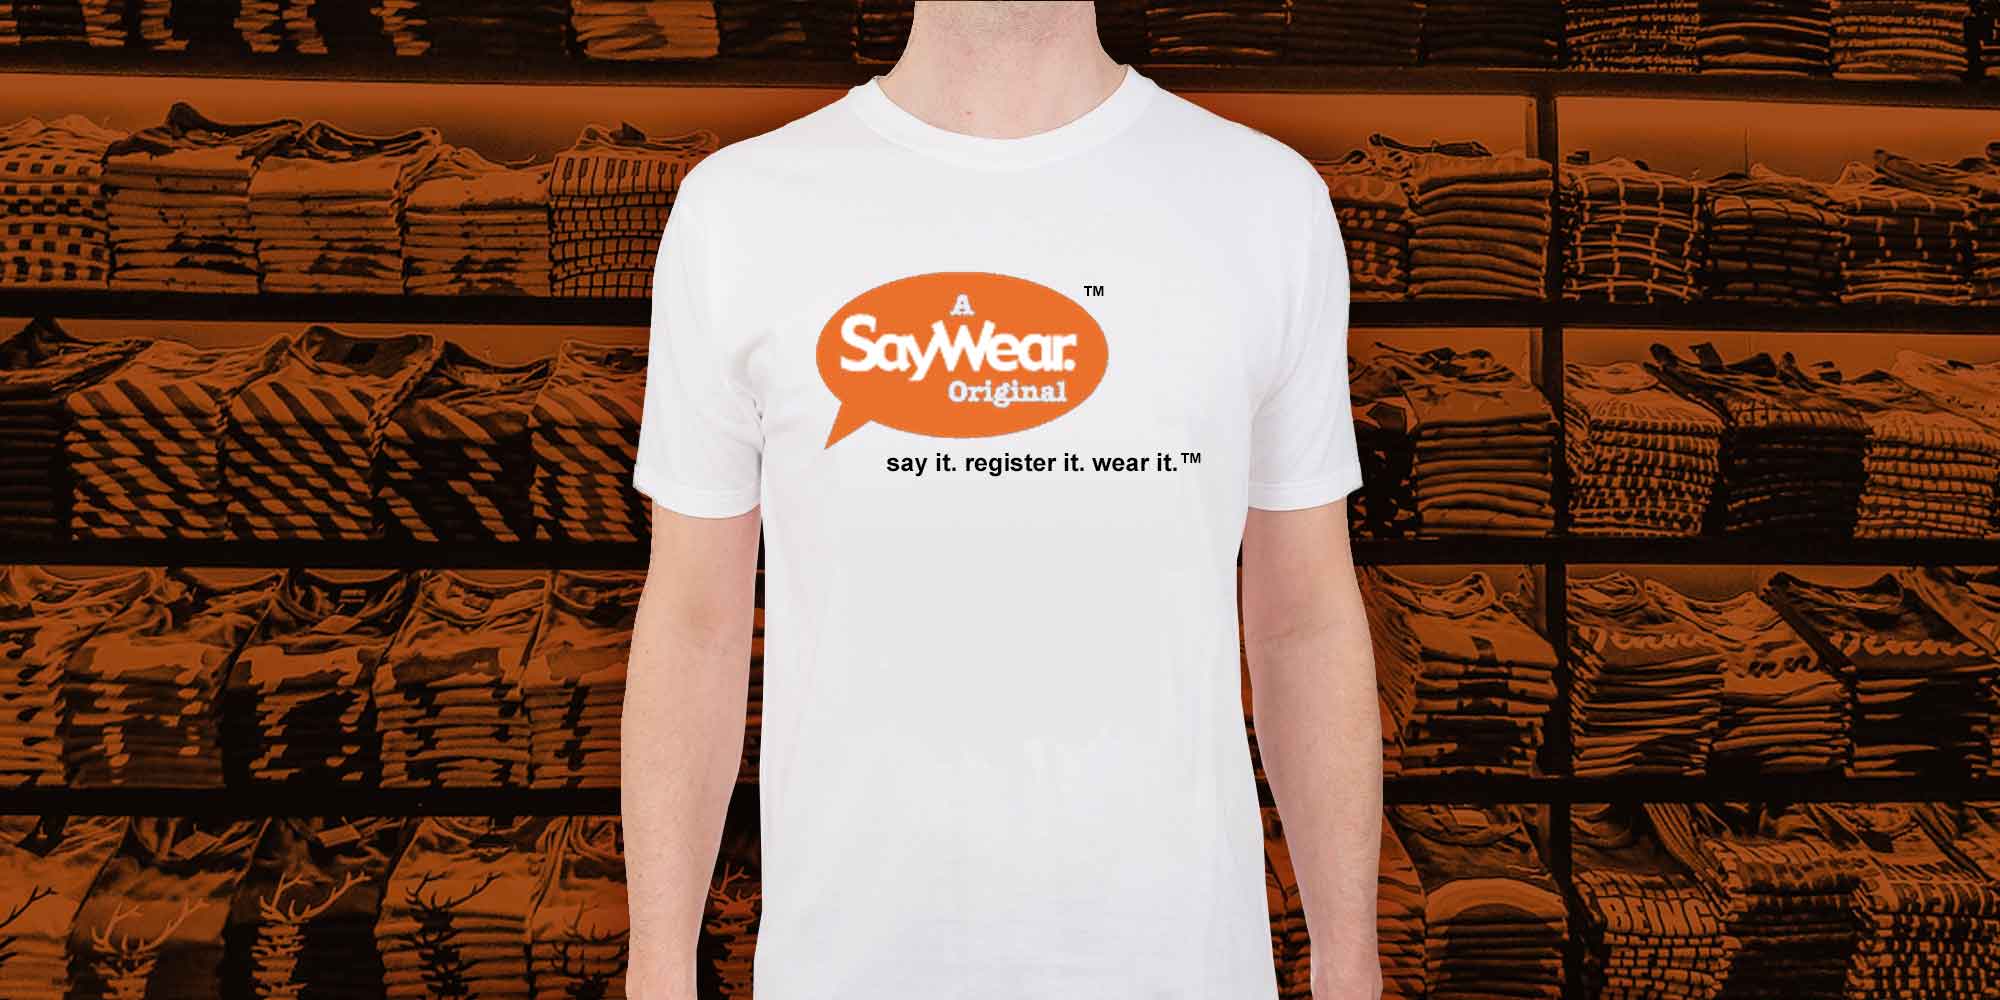 SayWear Launches First Online T-Shirt Sayings Registry (2004)